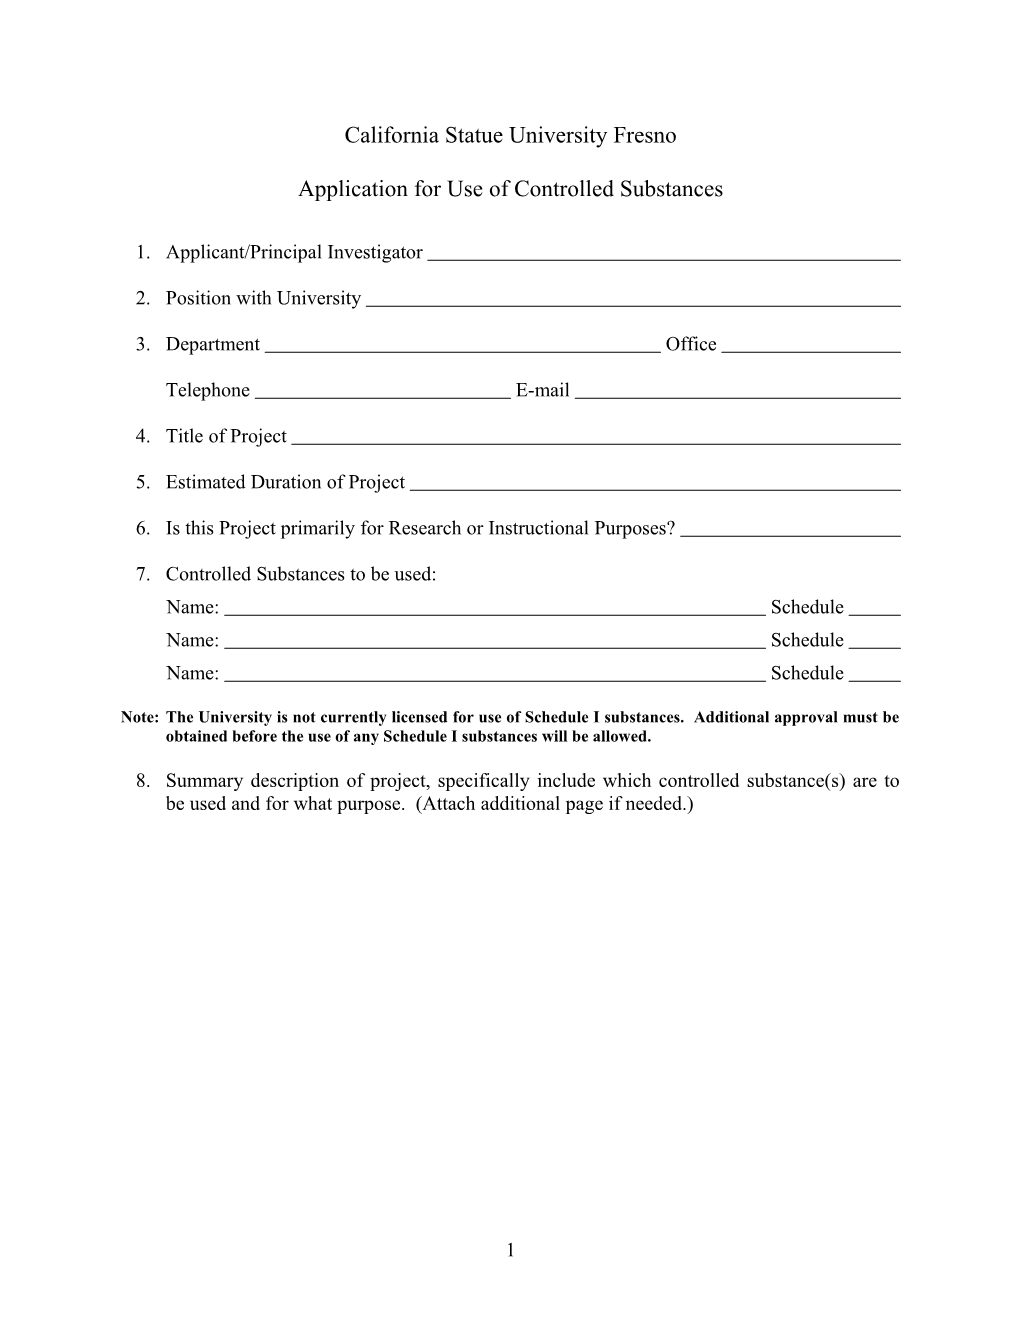 Application for Use of Controlled Substances